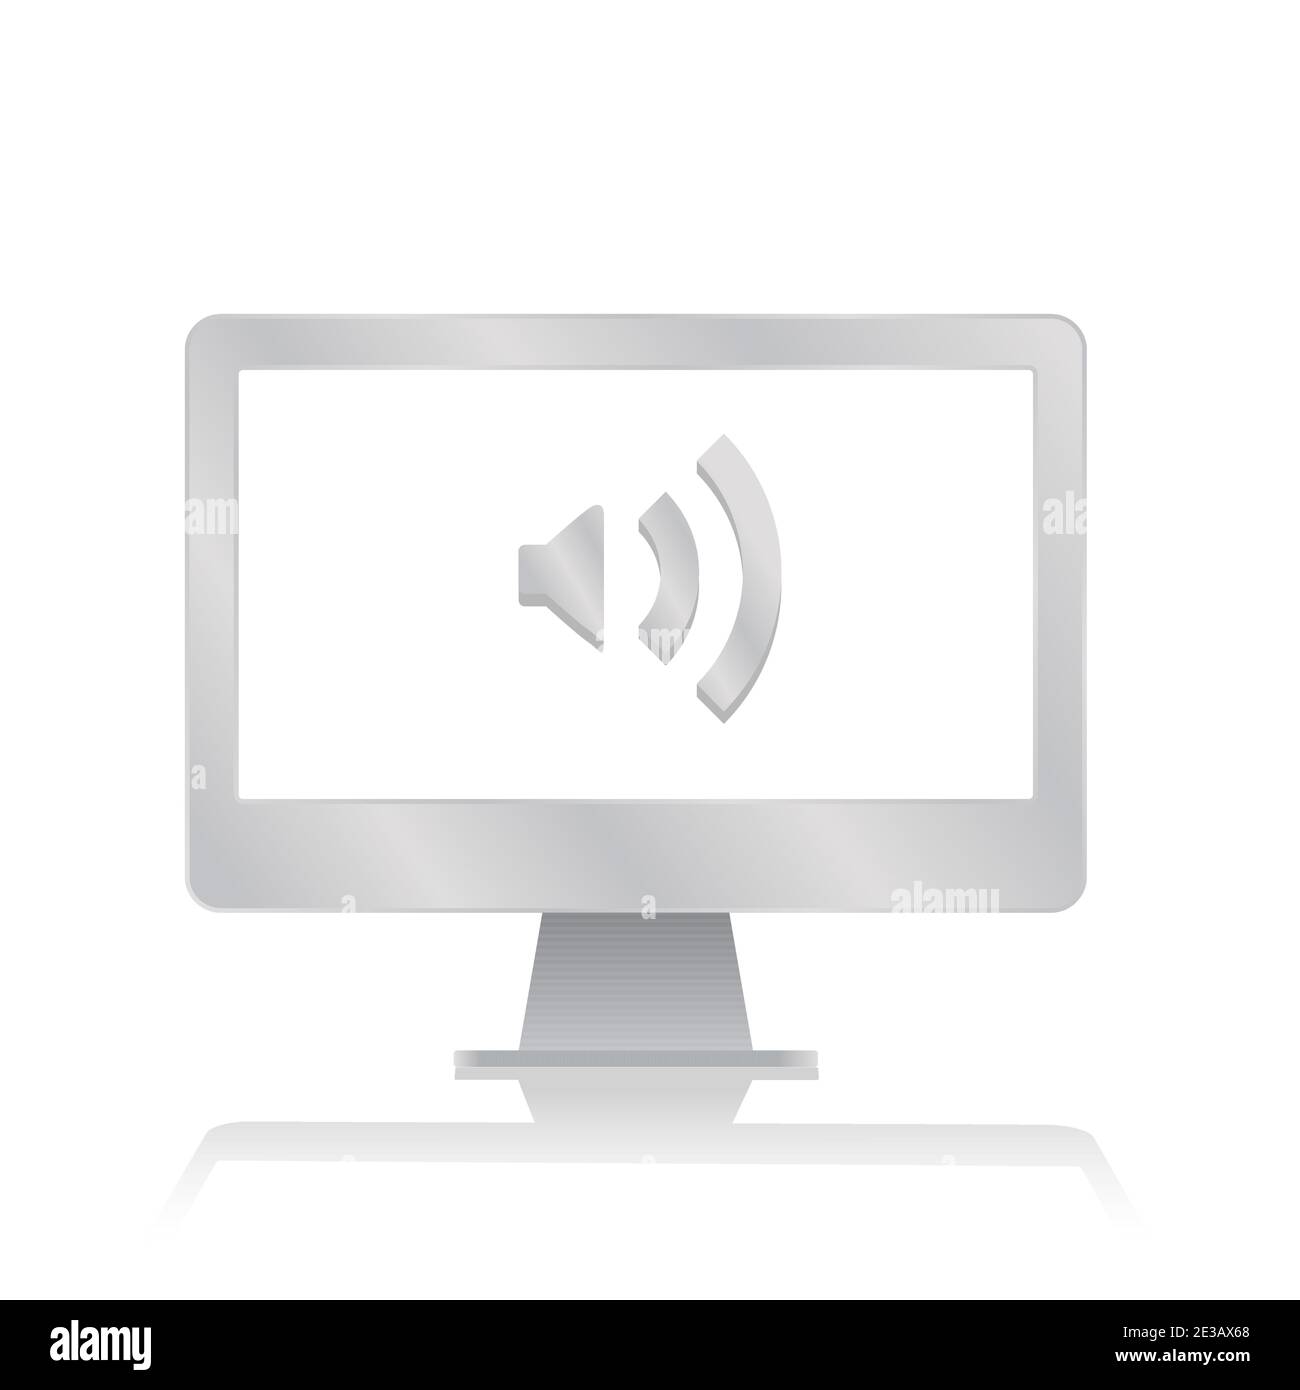 sound volume icon inside blank screen computer monitor with reflection minimalist modern icon vector illustration Stock Vector